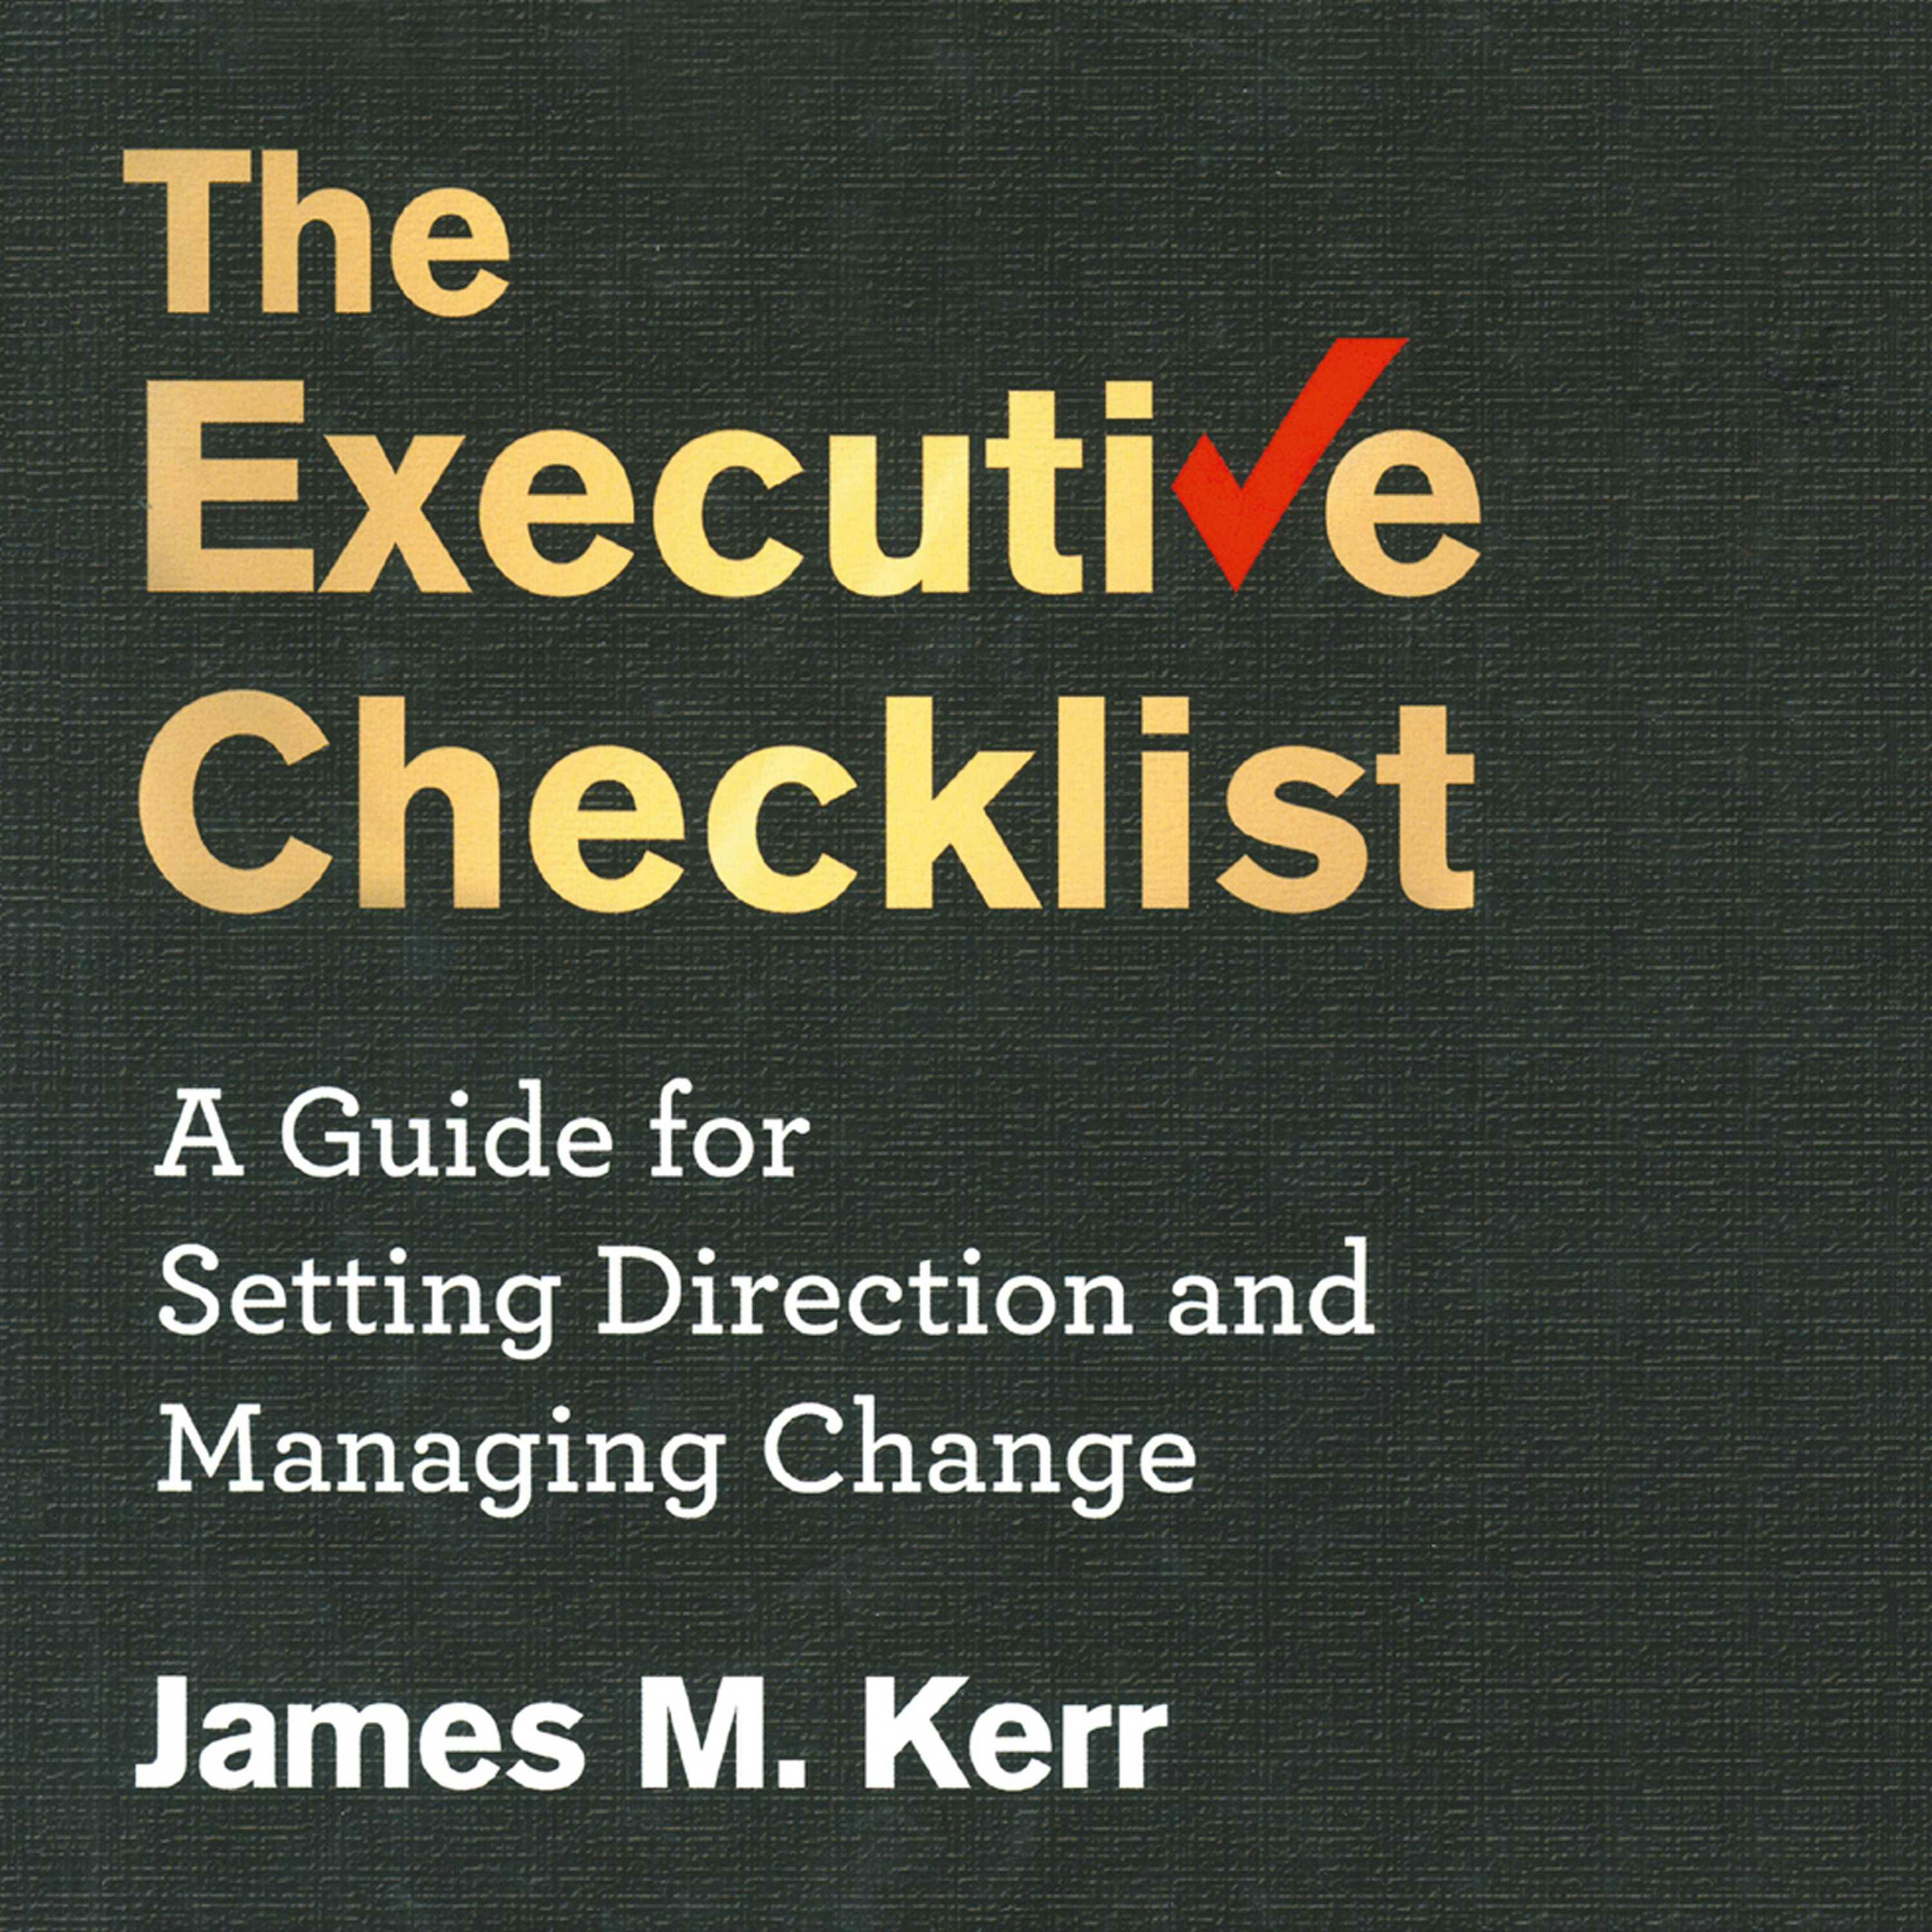 The Executive Checklist: A Guide for Setting Direction and Managing Change - James M. Kerr